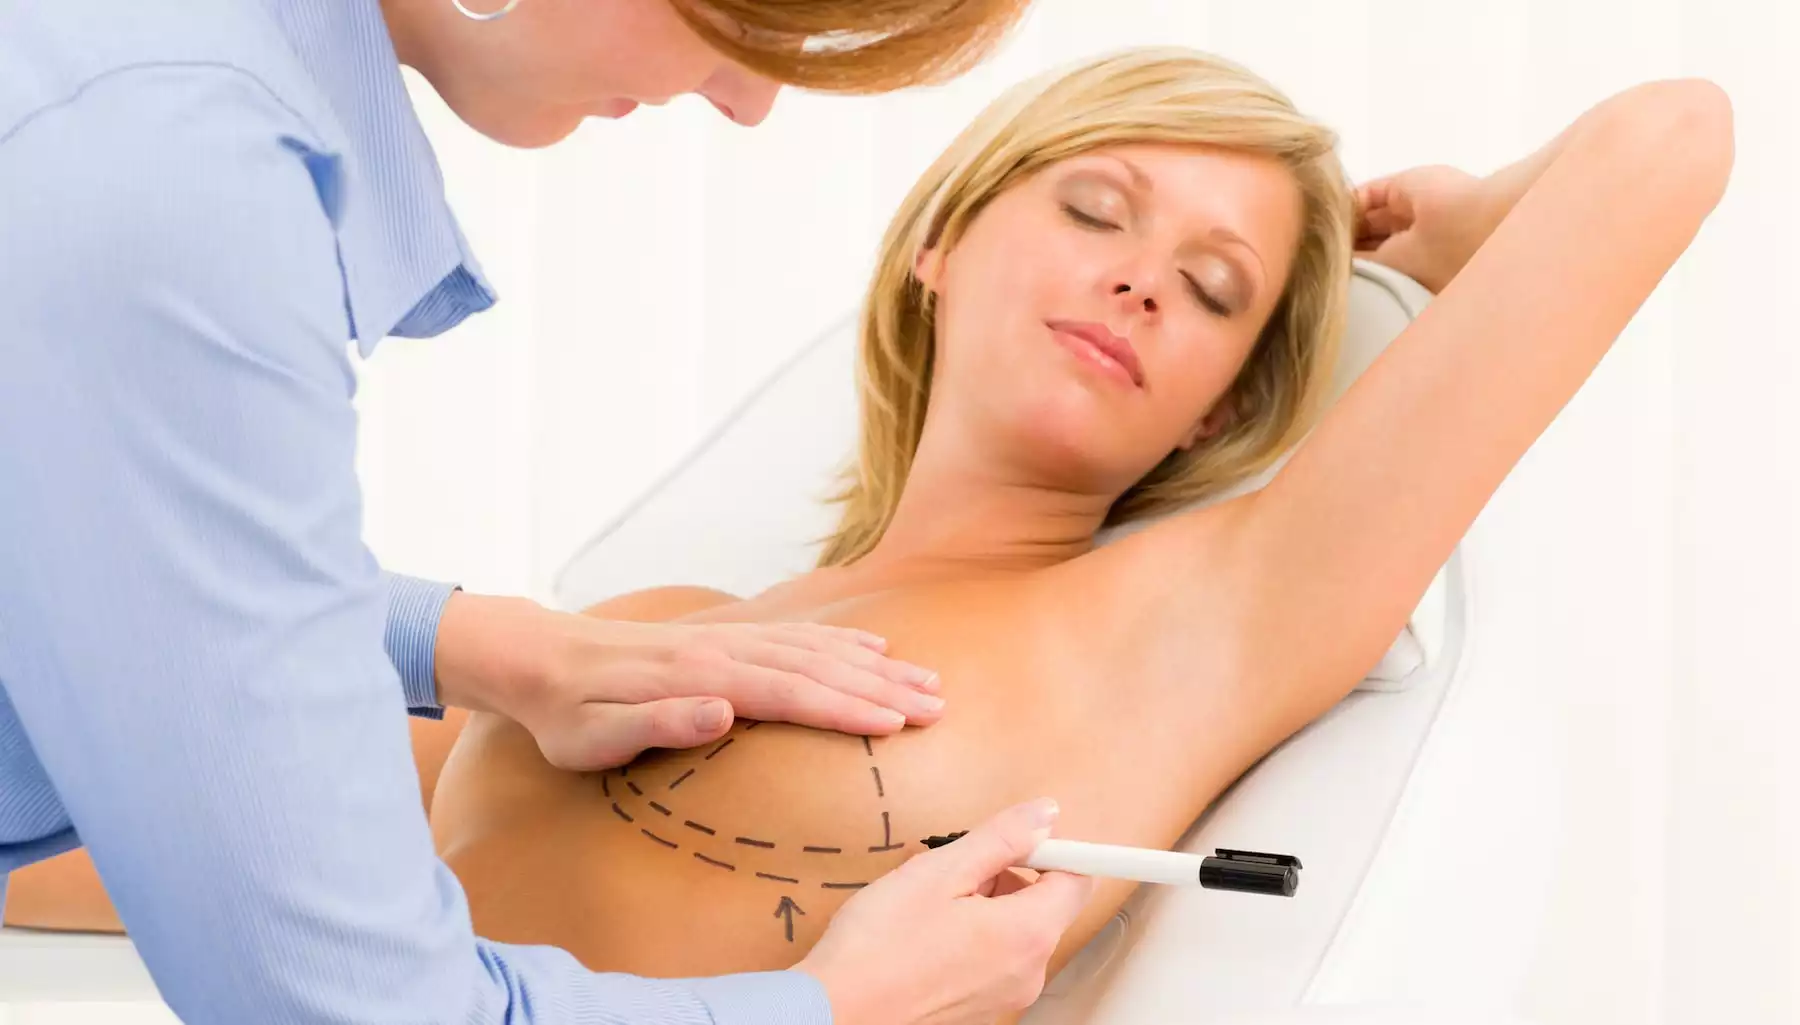 WHY HAVE A BREAST ENLARGEMENT SURGERY ?